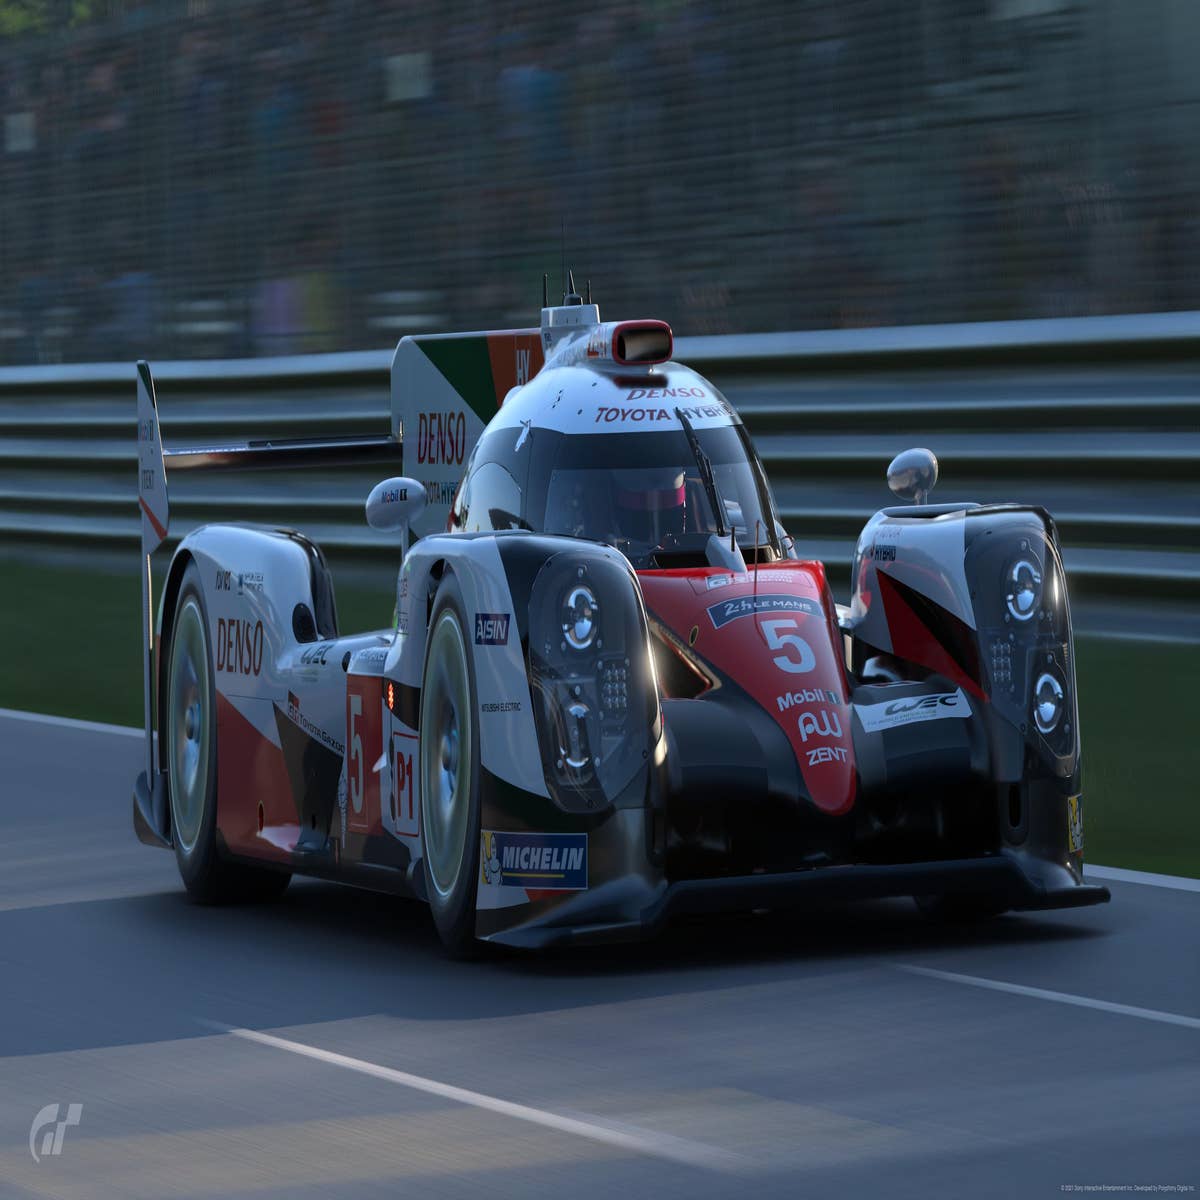 Gran Turismo 7 review: Pomp and circumstance